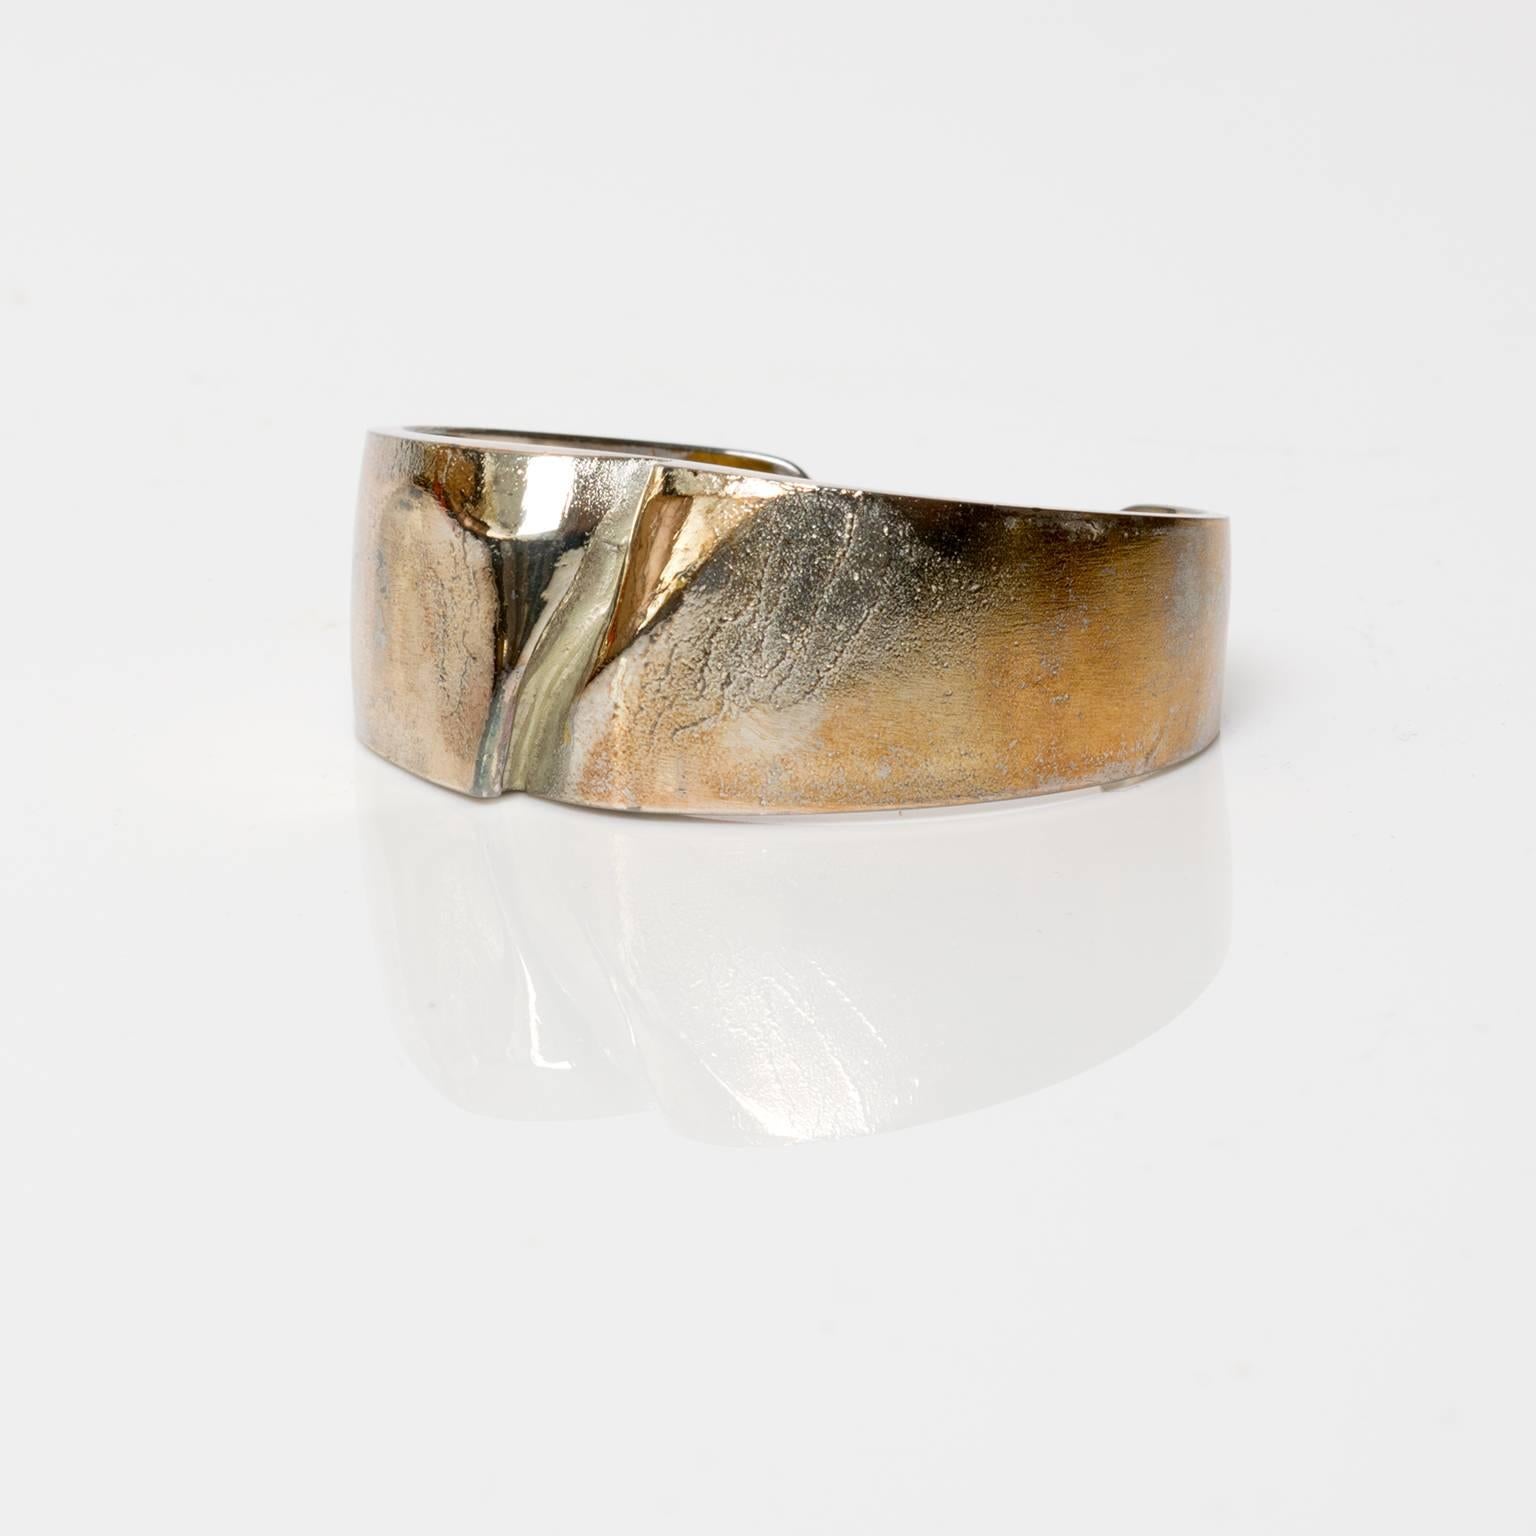 A Finnish silver bracelet in silver by Bjorn Weckstrom for Lapponia, 1971. Weckstrom's work is famous for his unique patination  treatments and surface textures.
 
Width: 2.5